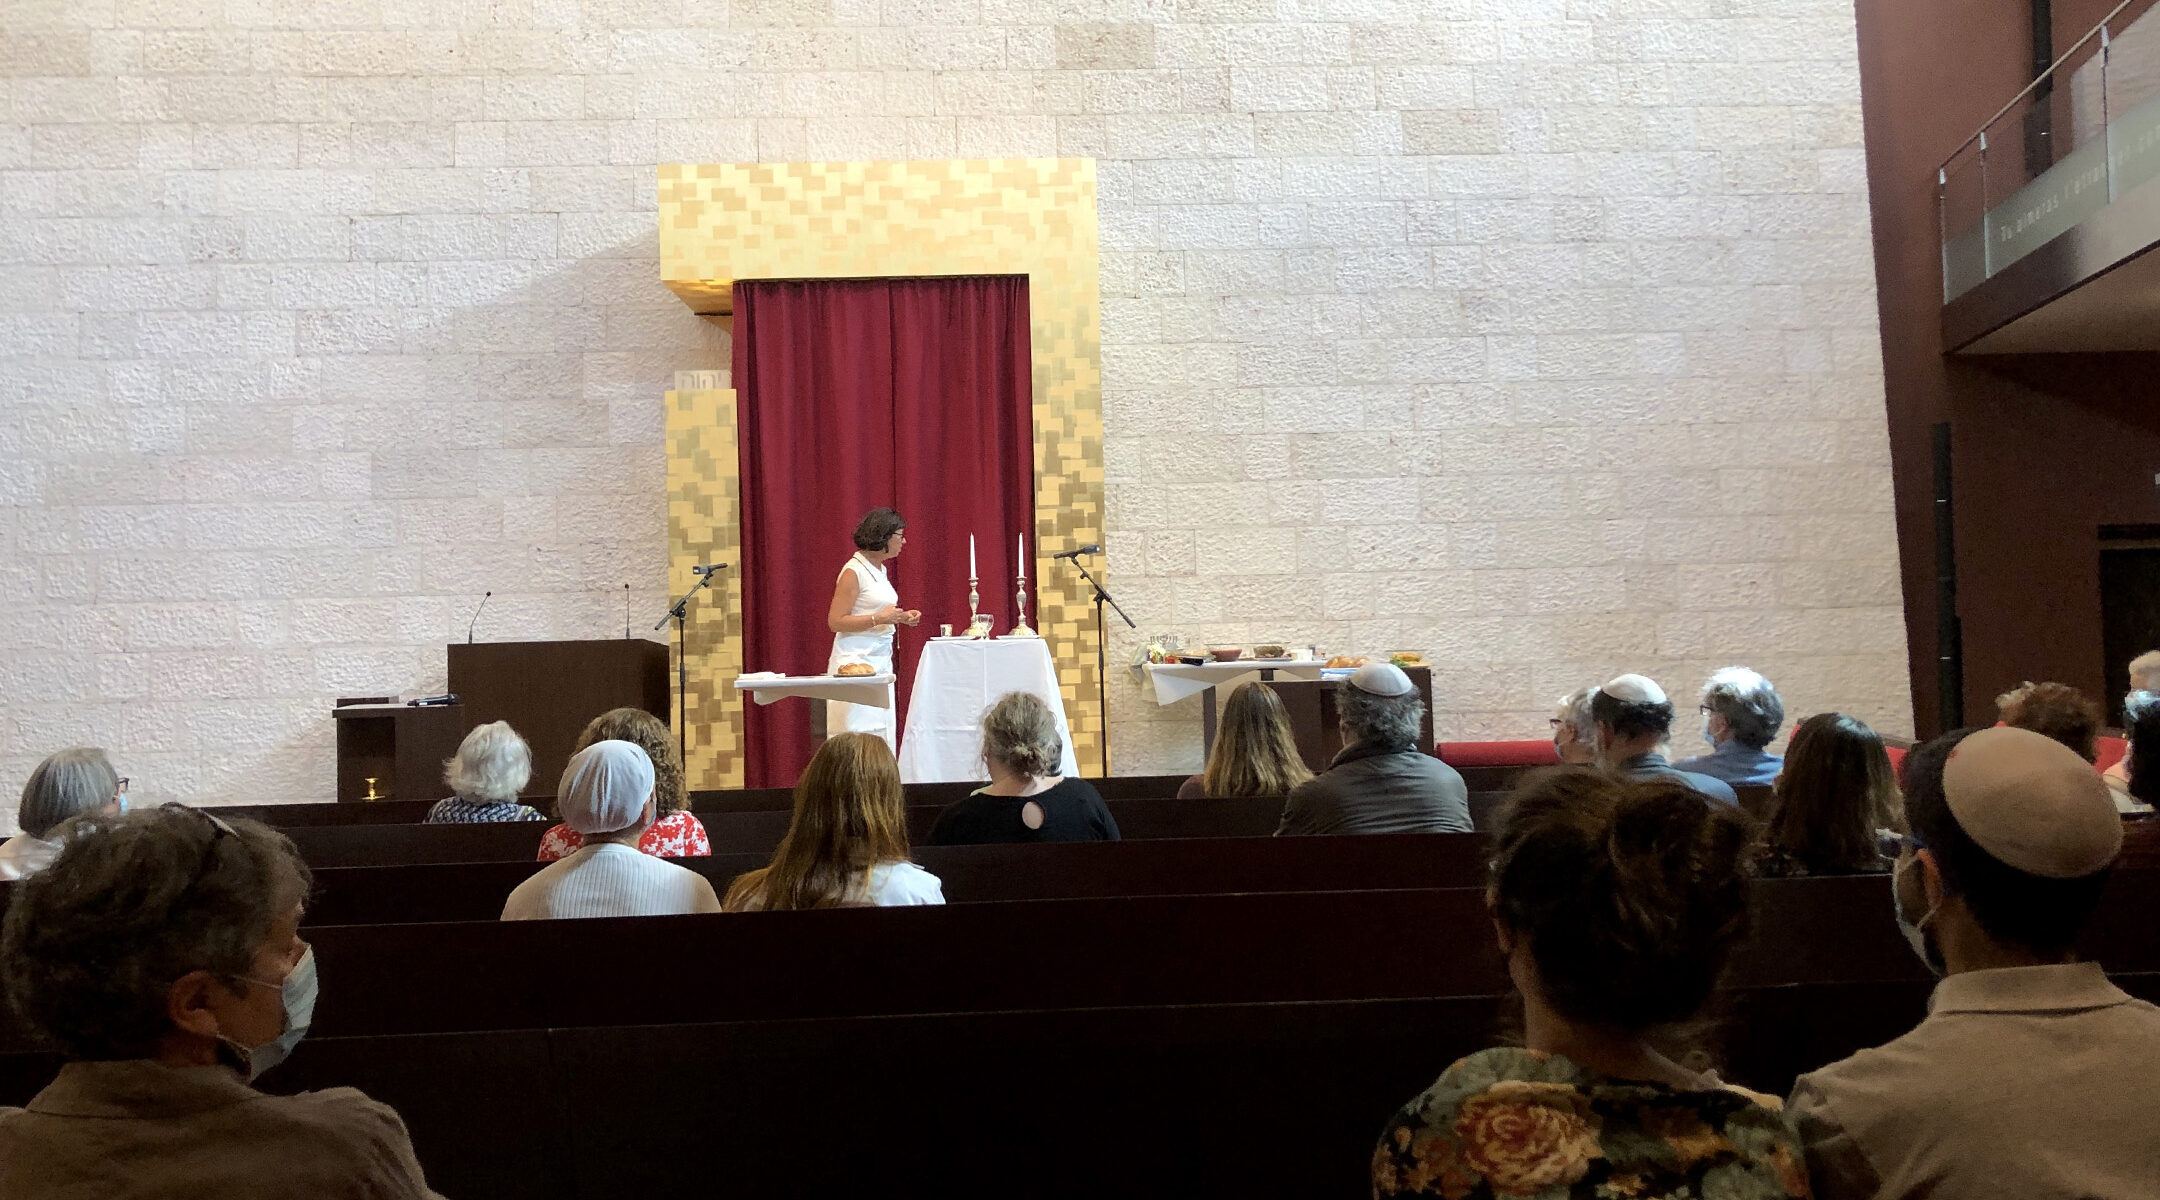 A member of the GIL Jewish community, Karin Rivollet, speaks about Judaism at the GIL synagogue in Geneva, Switzerland on Sept. 6, 2020. (Courtesy of GIL)